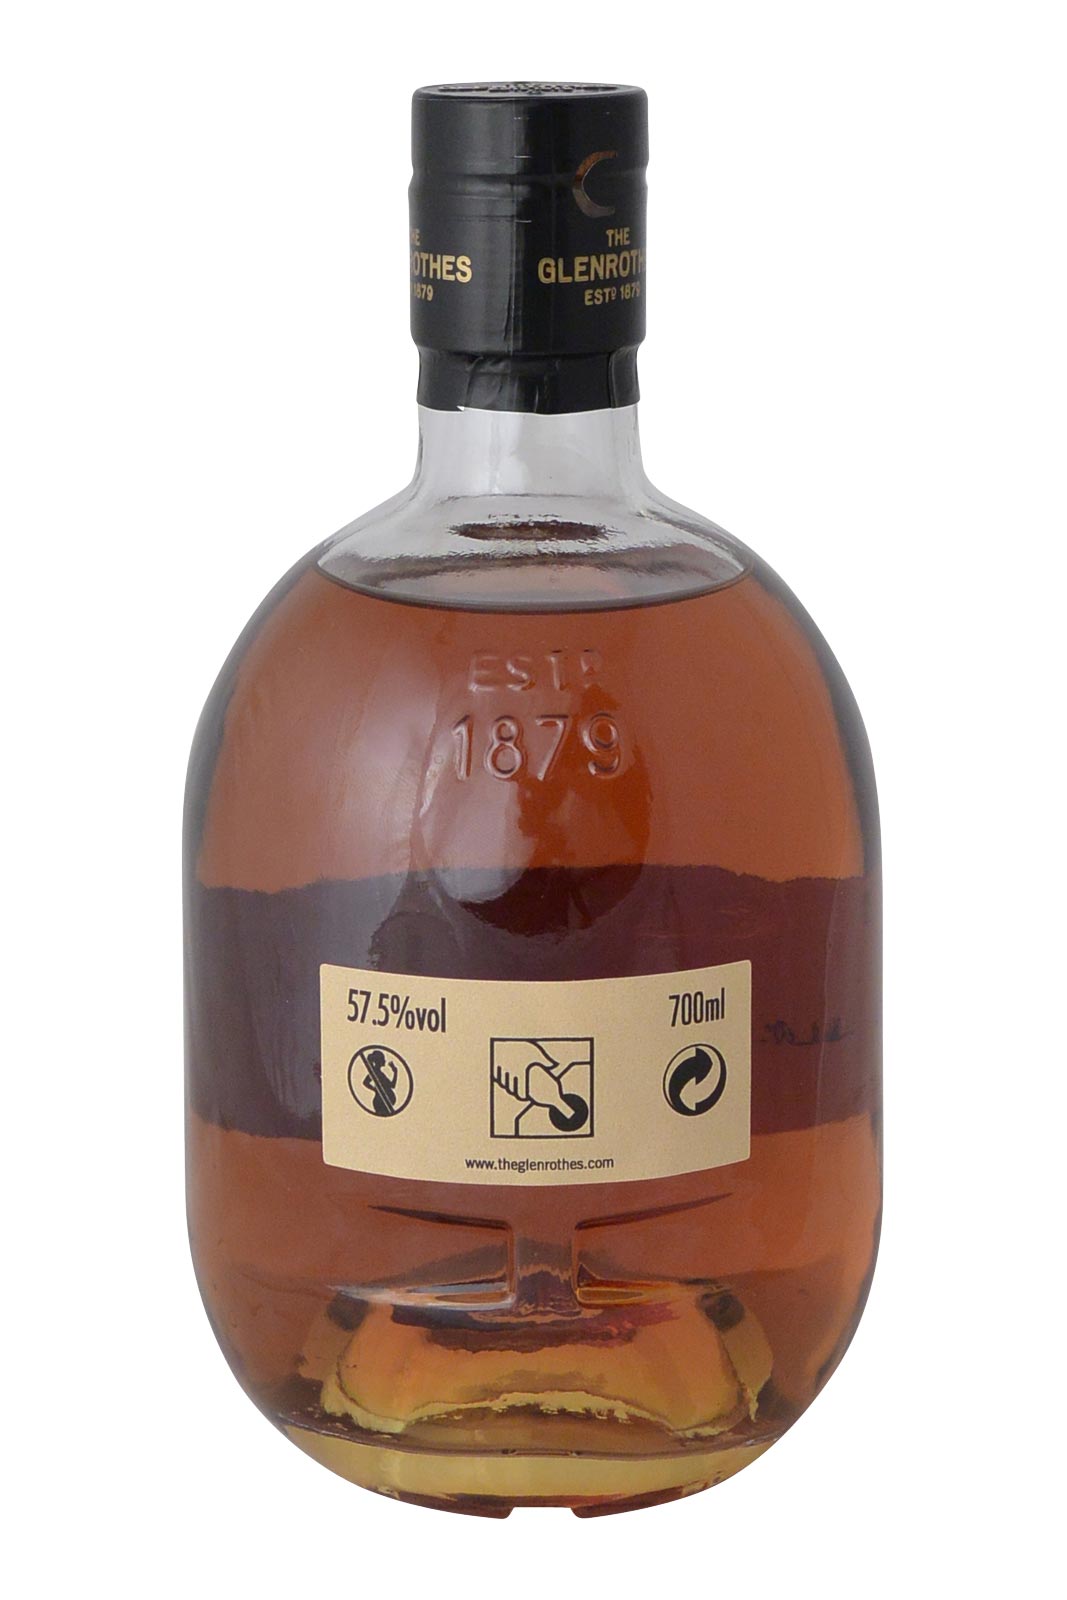 Glenrothes 1995 - Private cask n°9